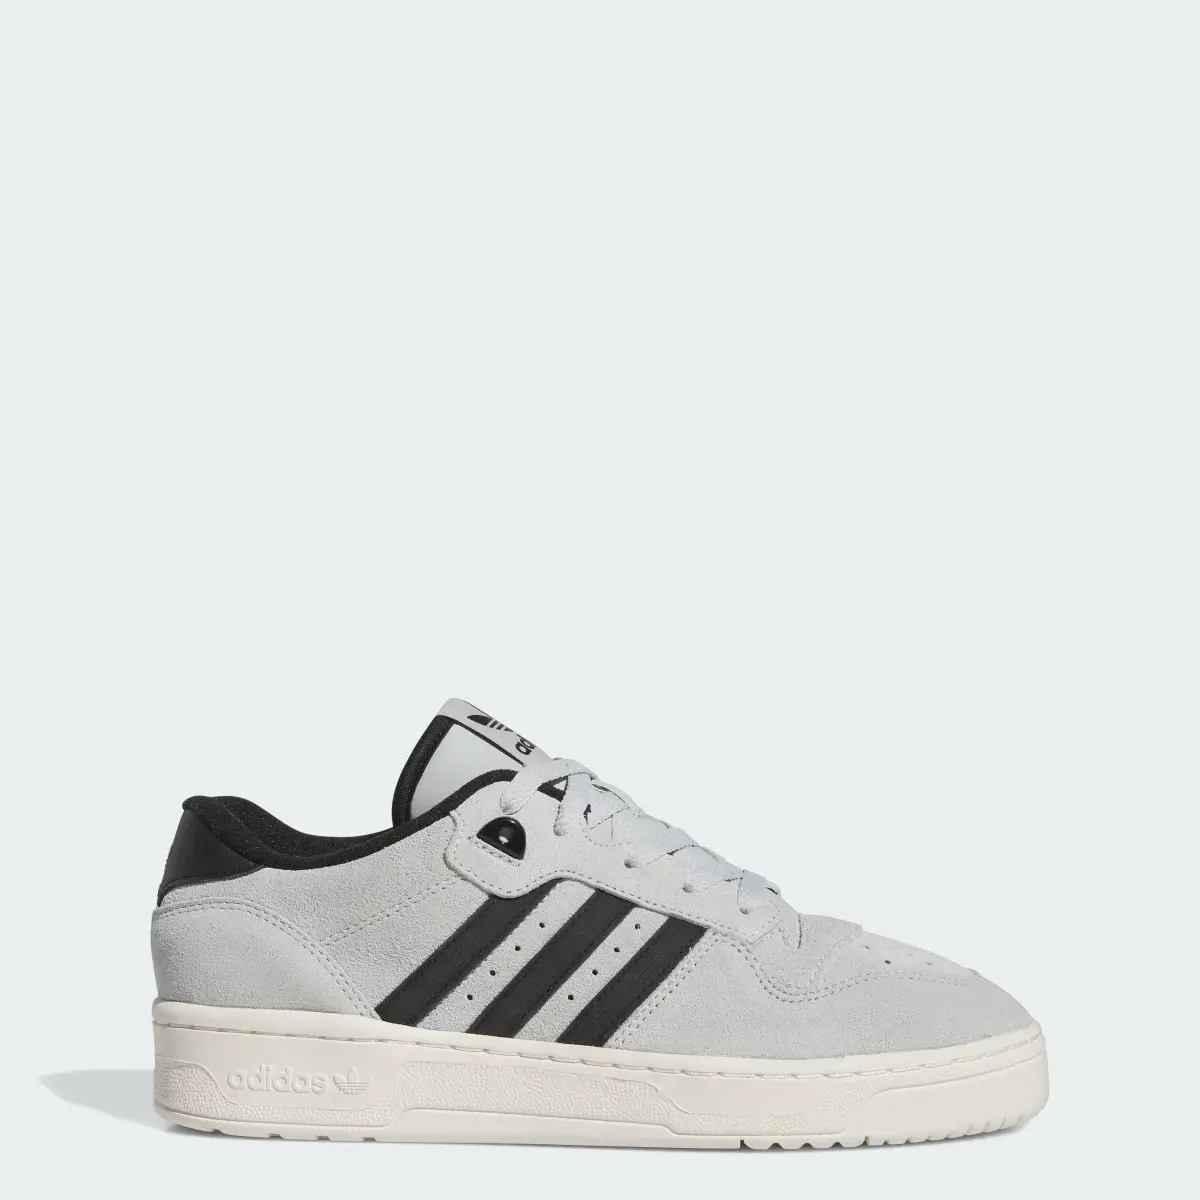 Adidas Rivalry Low Shoes. 1